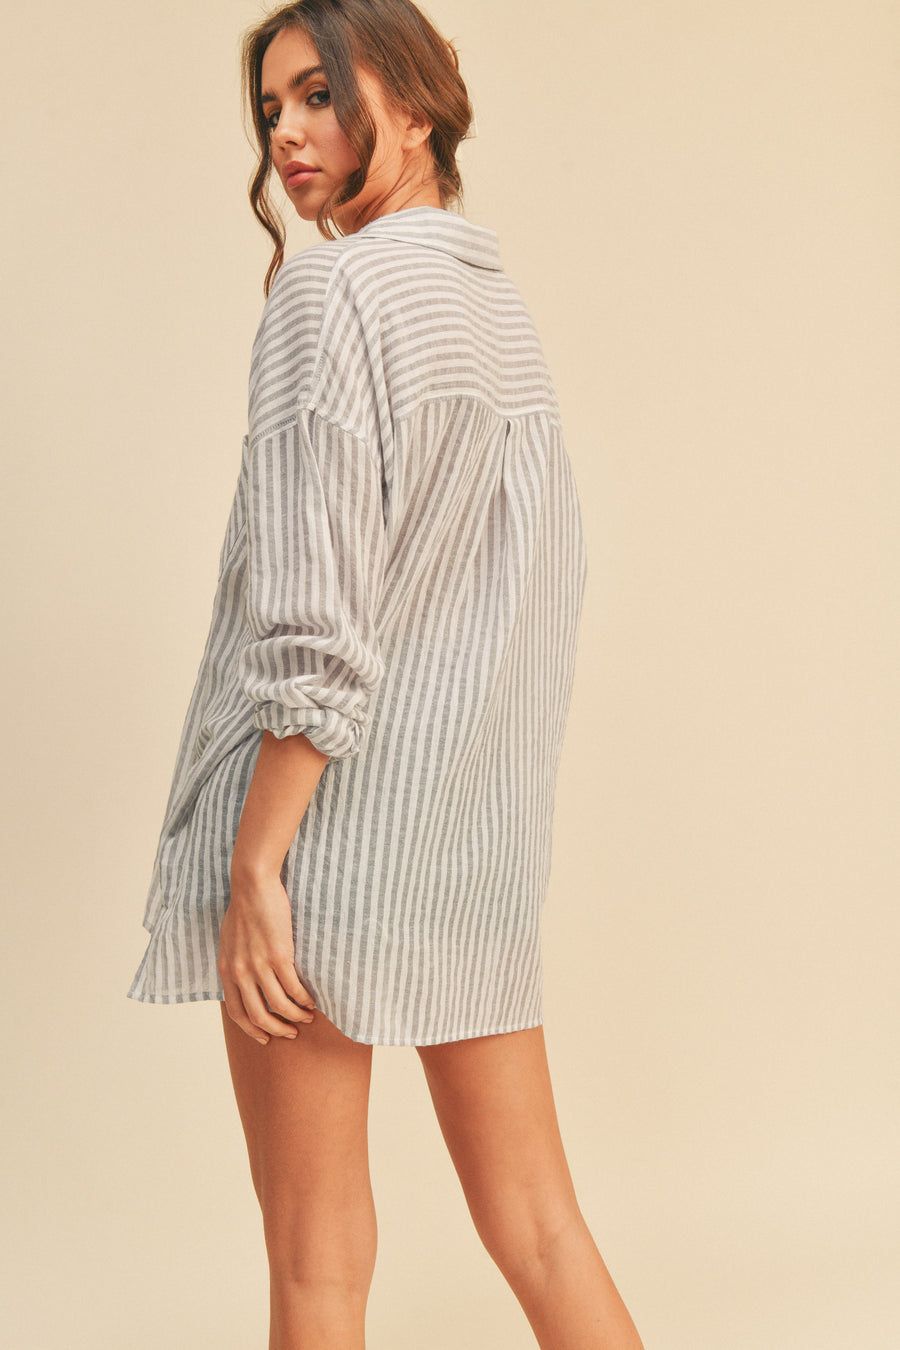 Striped oversized button down shirt.